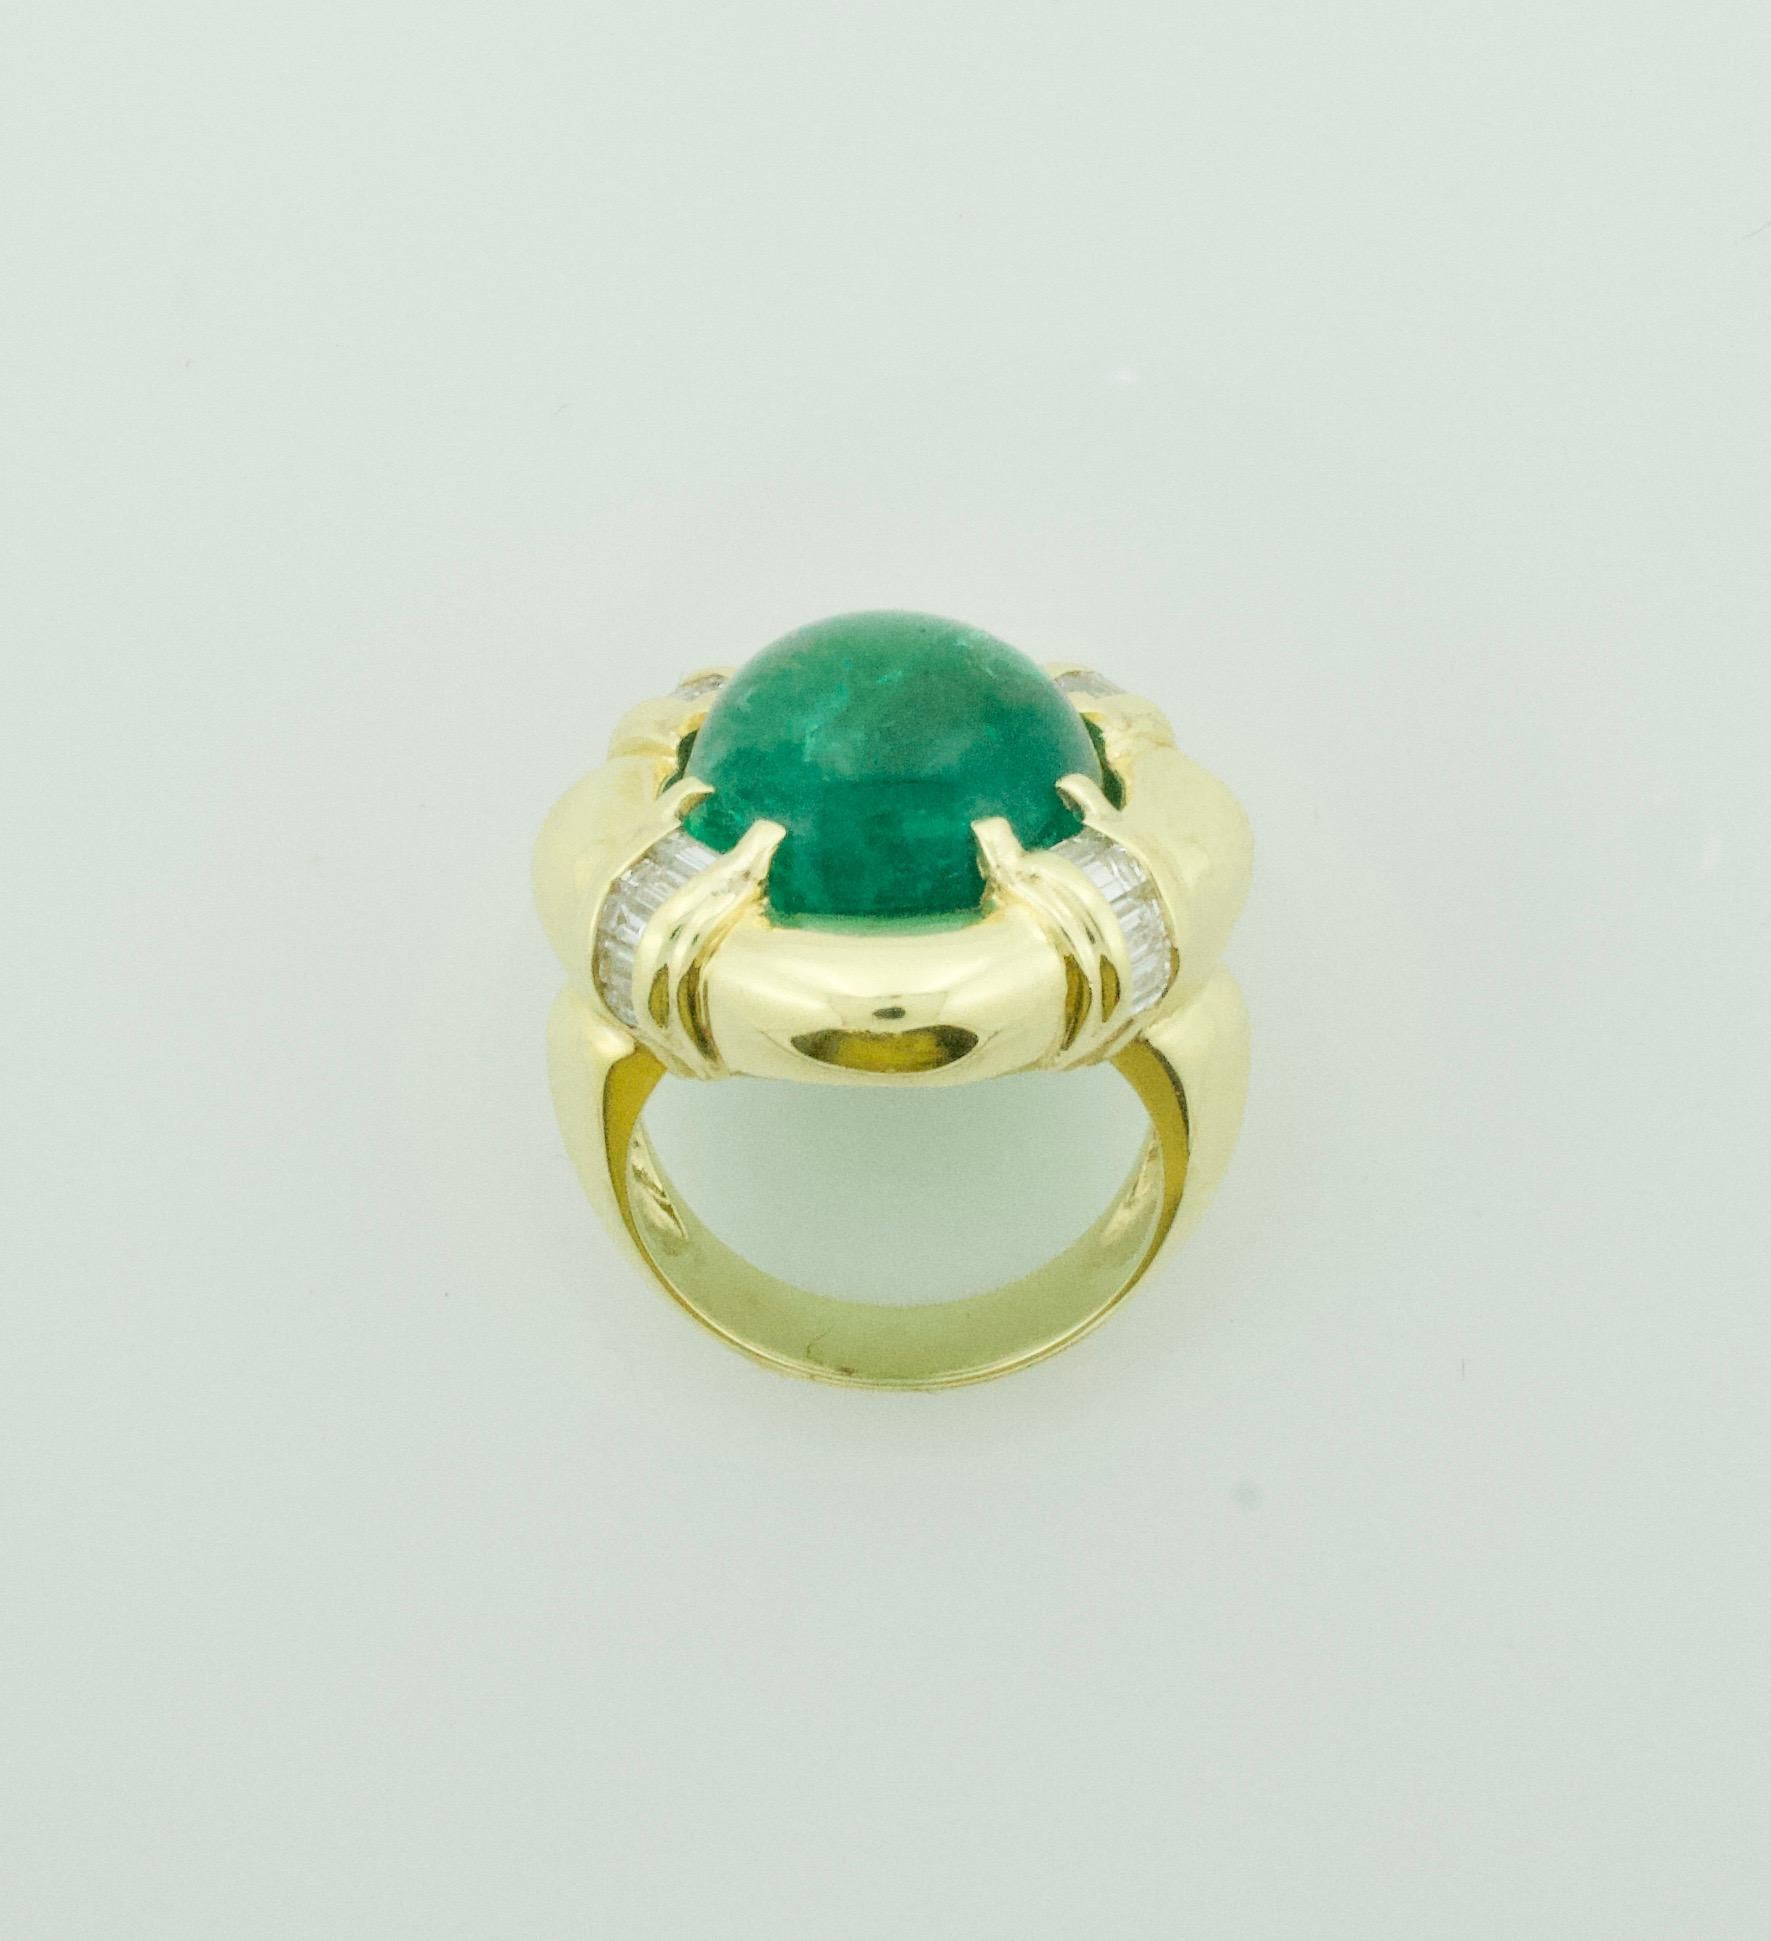 Large Cabochon Emerald and Diamond Ring in 18k Yellow Gold
One Cabochon Emerald Weighing 16.08 Carats [Beautiful Color and Vibrancy] 
Twenty Baguette  Cut Diamonds Weighing 1.14 Carats [GH VVS-VS] 